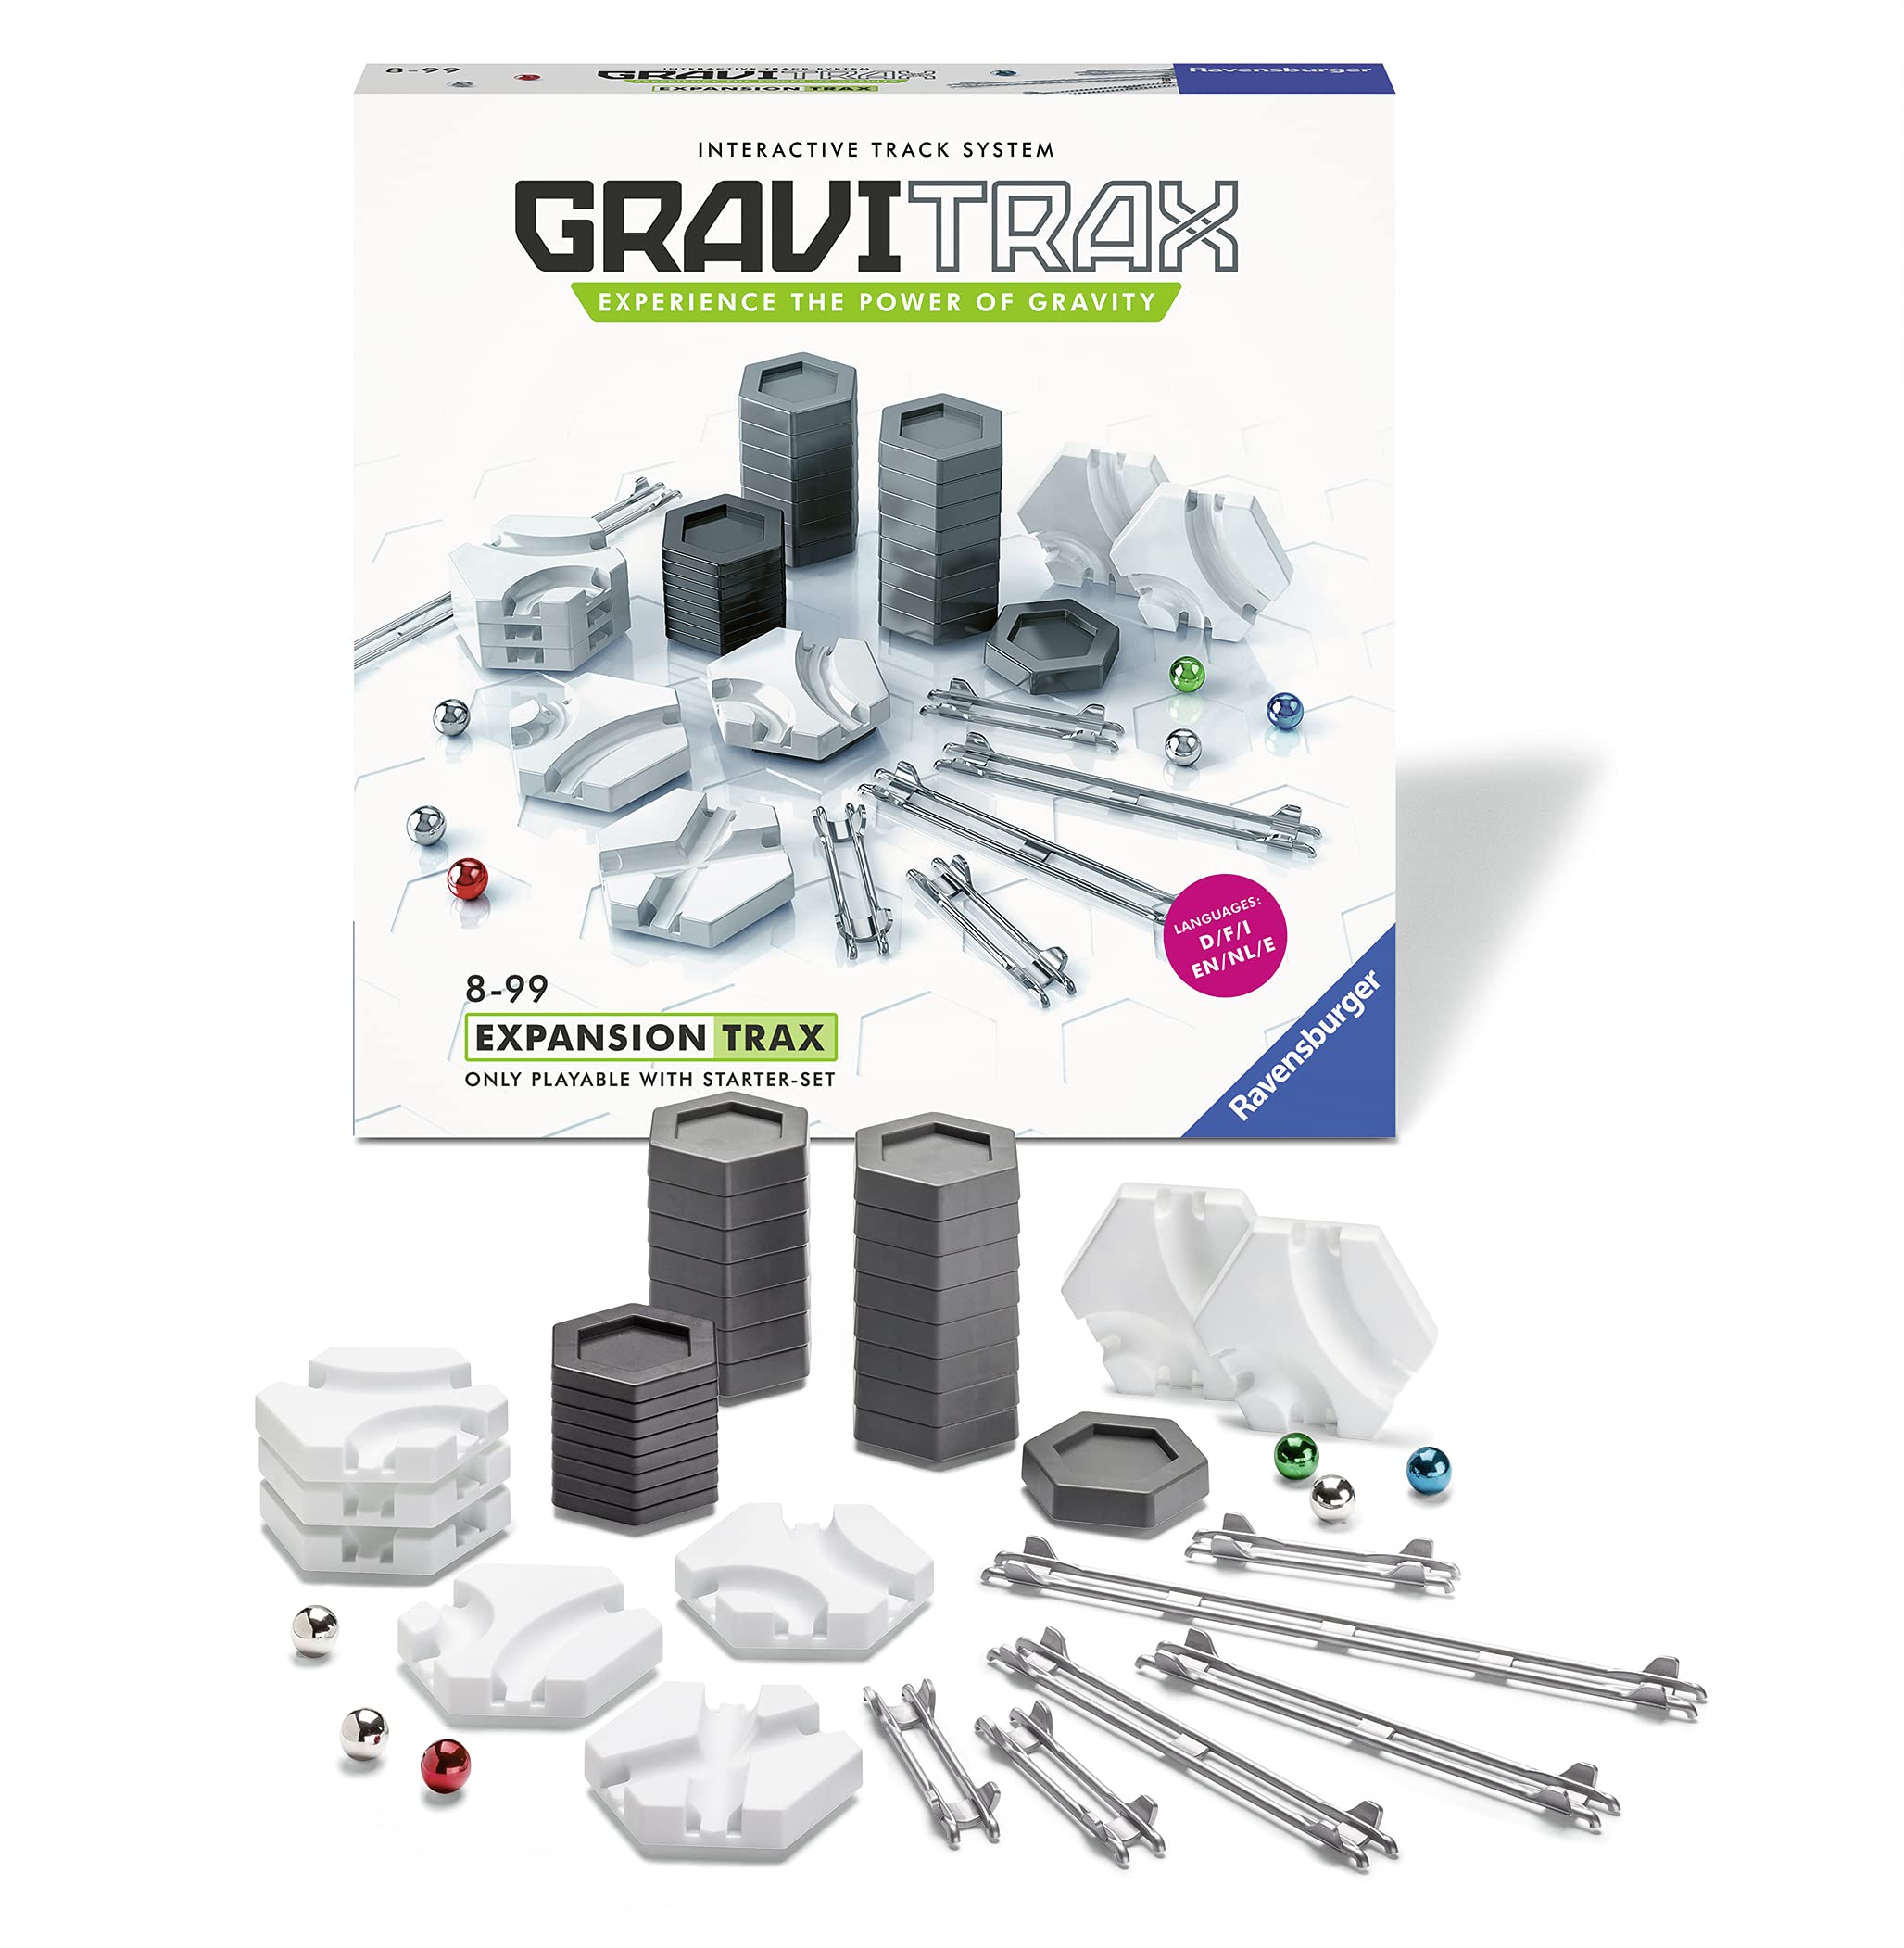 Ravensburger 27601 Gravitrax Trax Expansion Set Marble Run & STEM Toy For Boys & Girls Age 8 & Up - Expansion For 2019 Toy of The Year Finalist Gravitrax, Multi